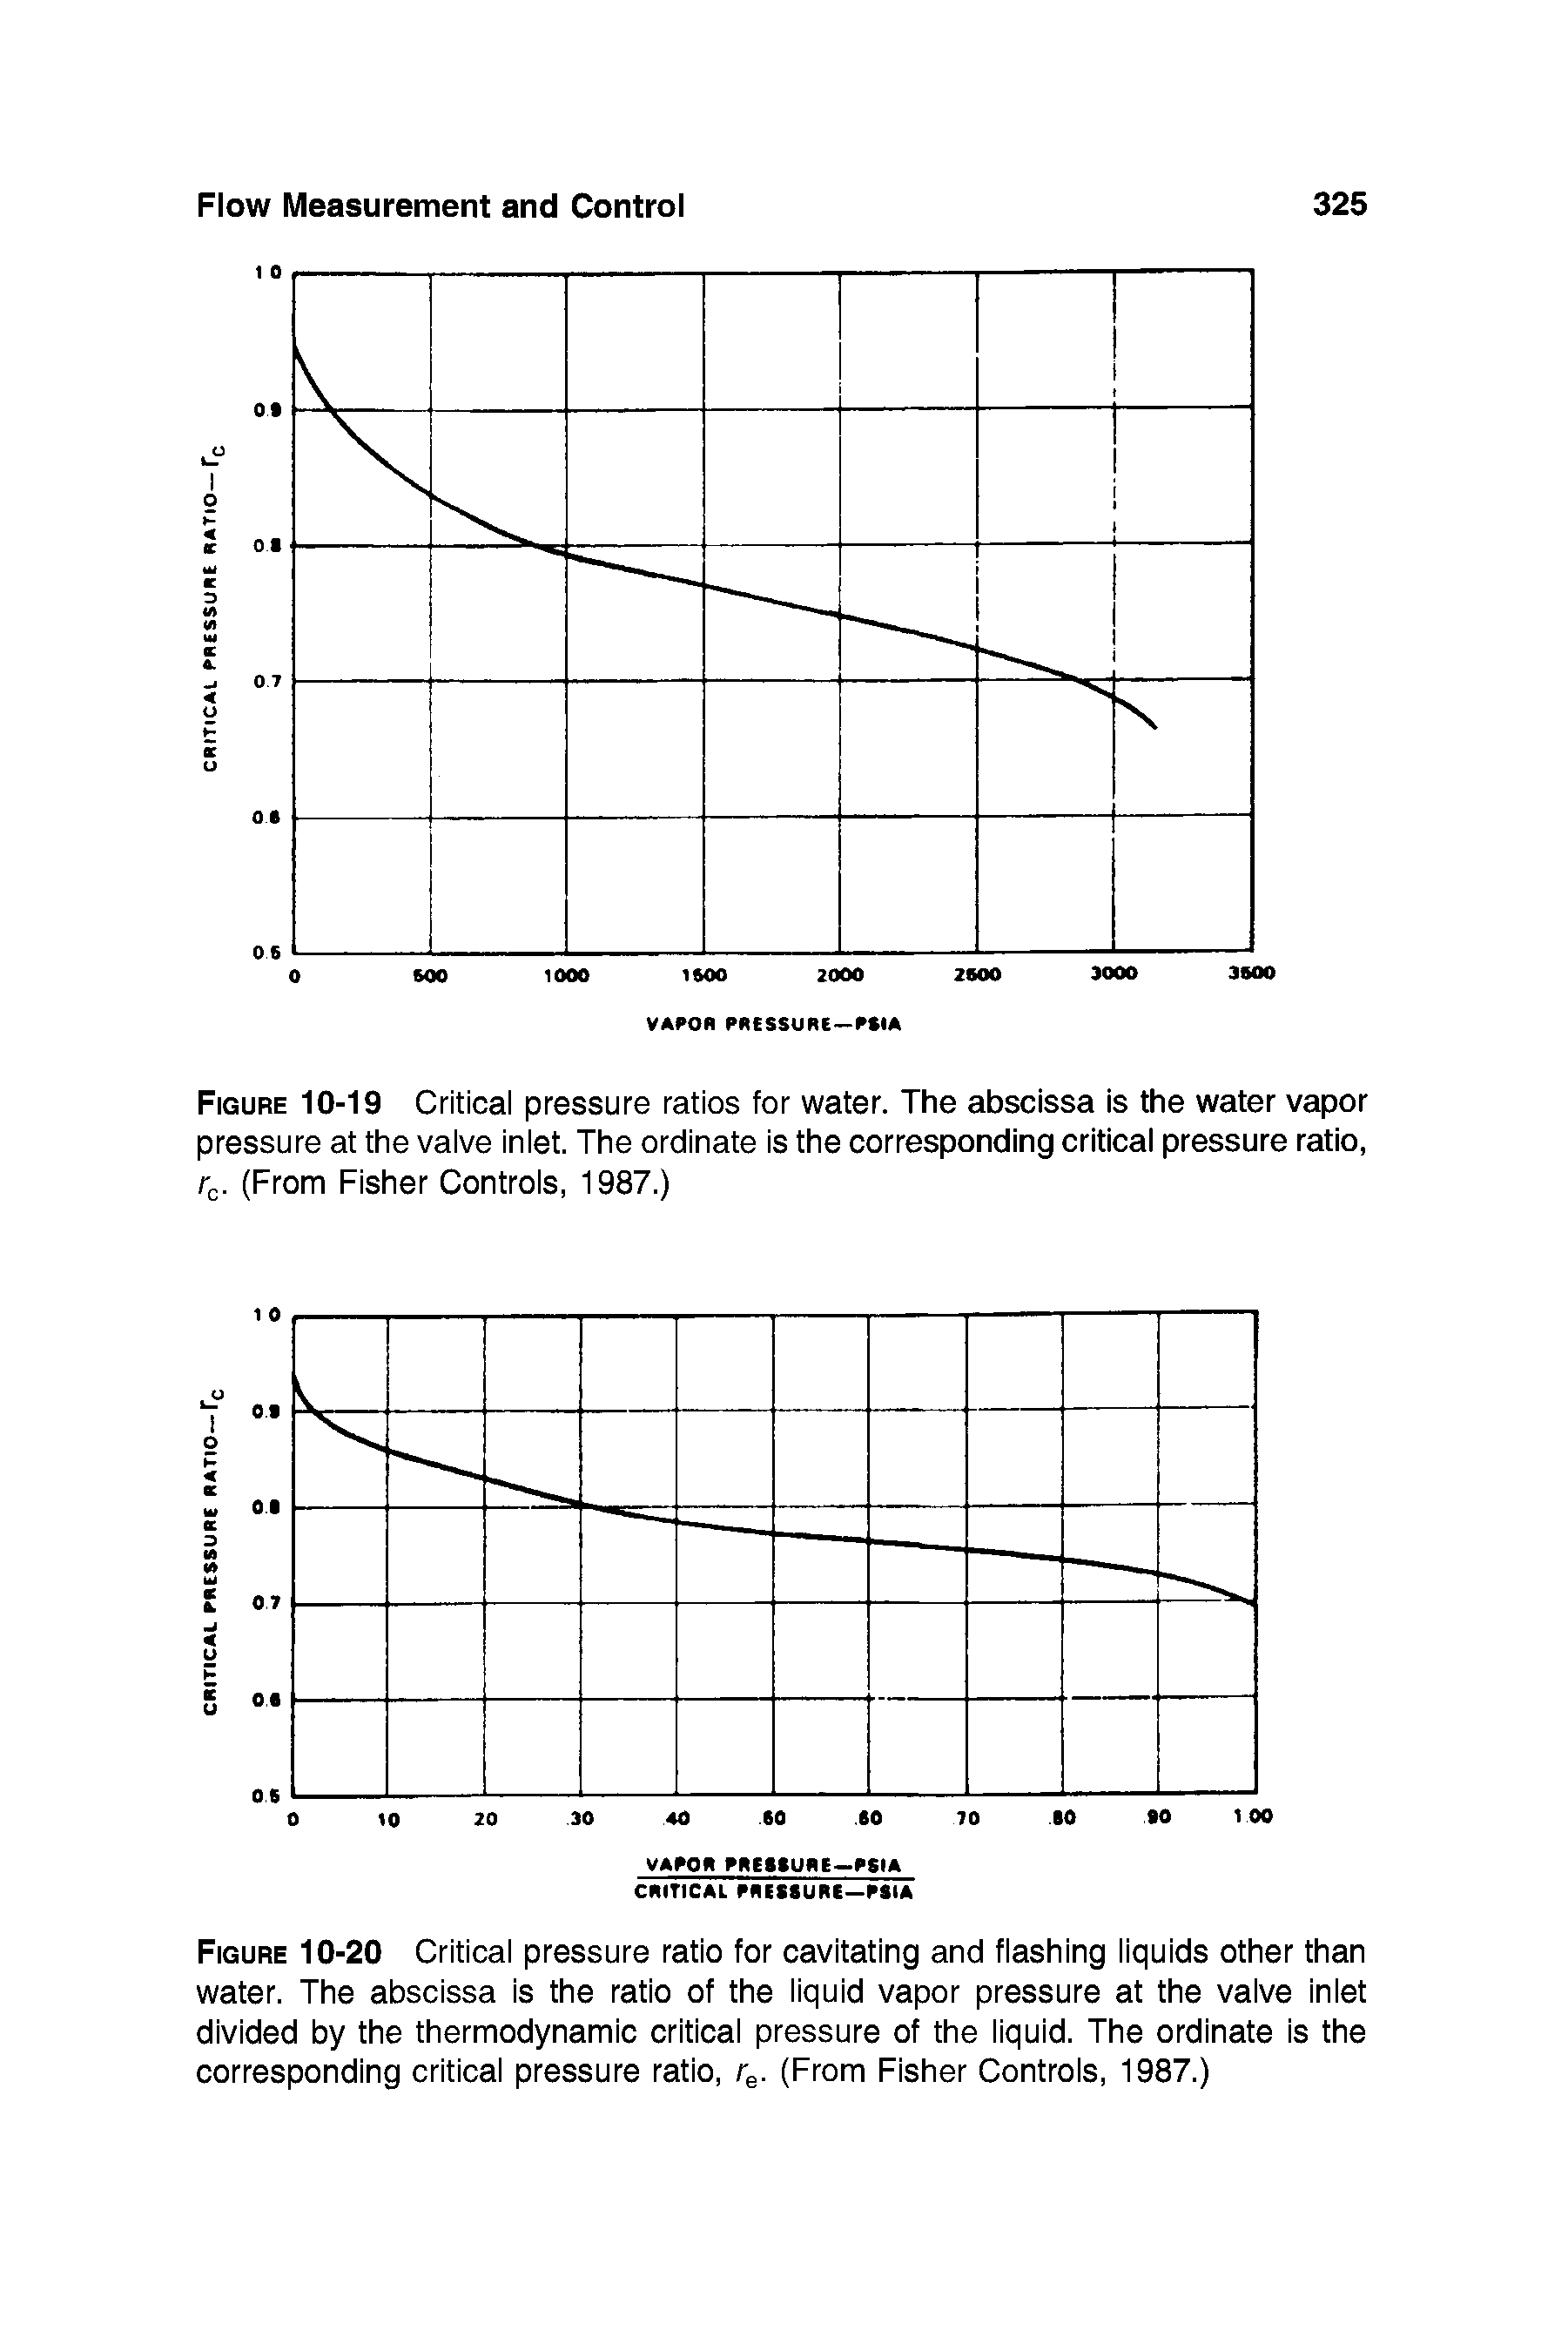 Figure 10-20 Critical pressure ratio for cavitating and flashing liquids other than water. The abscissa is the ratio of the liquid vapor pressure at the valve inlet divided by the thermodynamic critical pressure of the liquid. The ordinate is the corresponding critical pressure ratio, re. (From Fisher Controls, 1987.)...